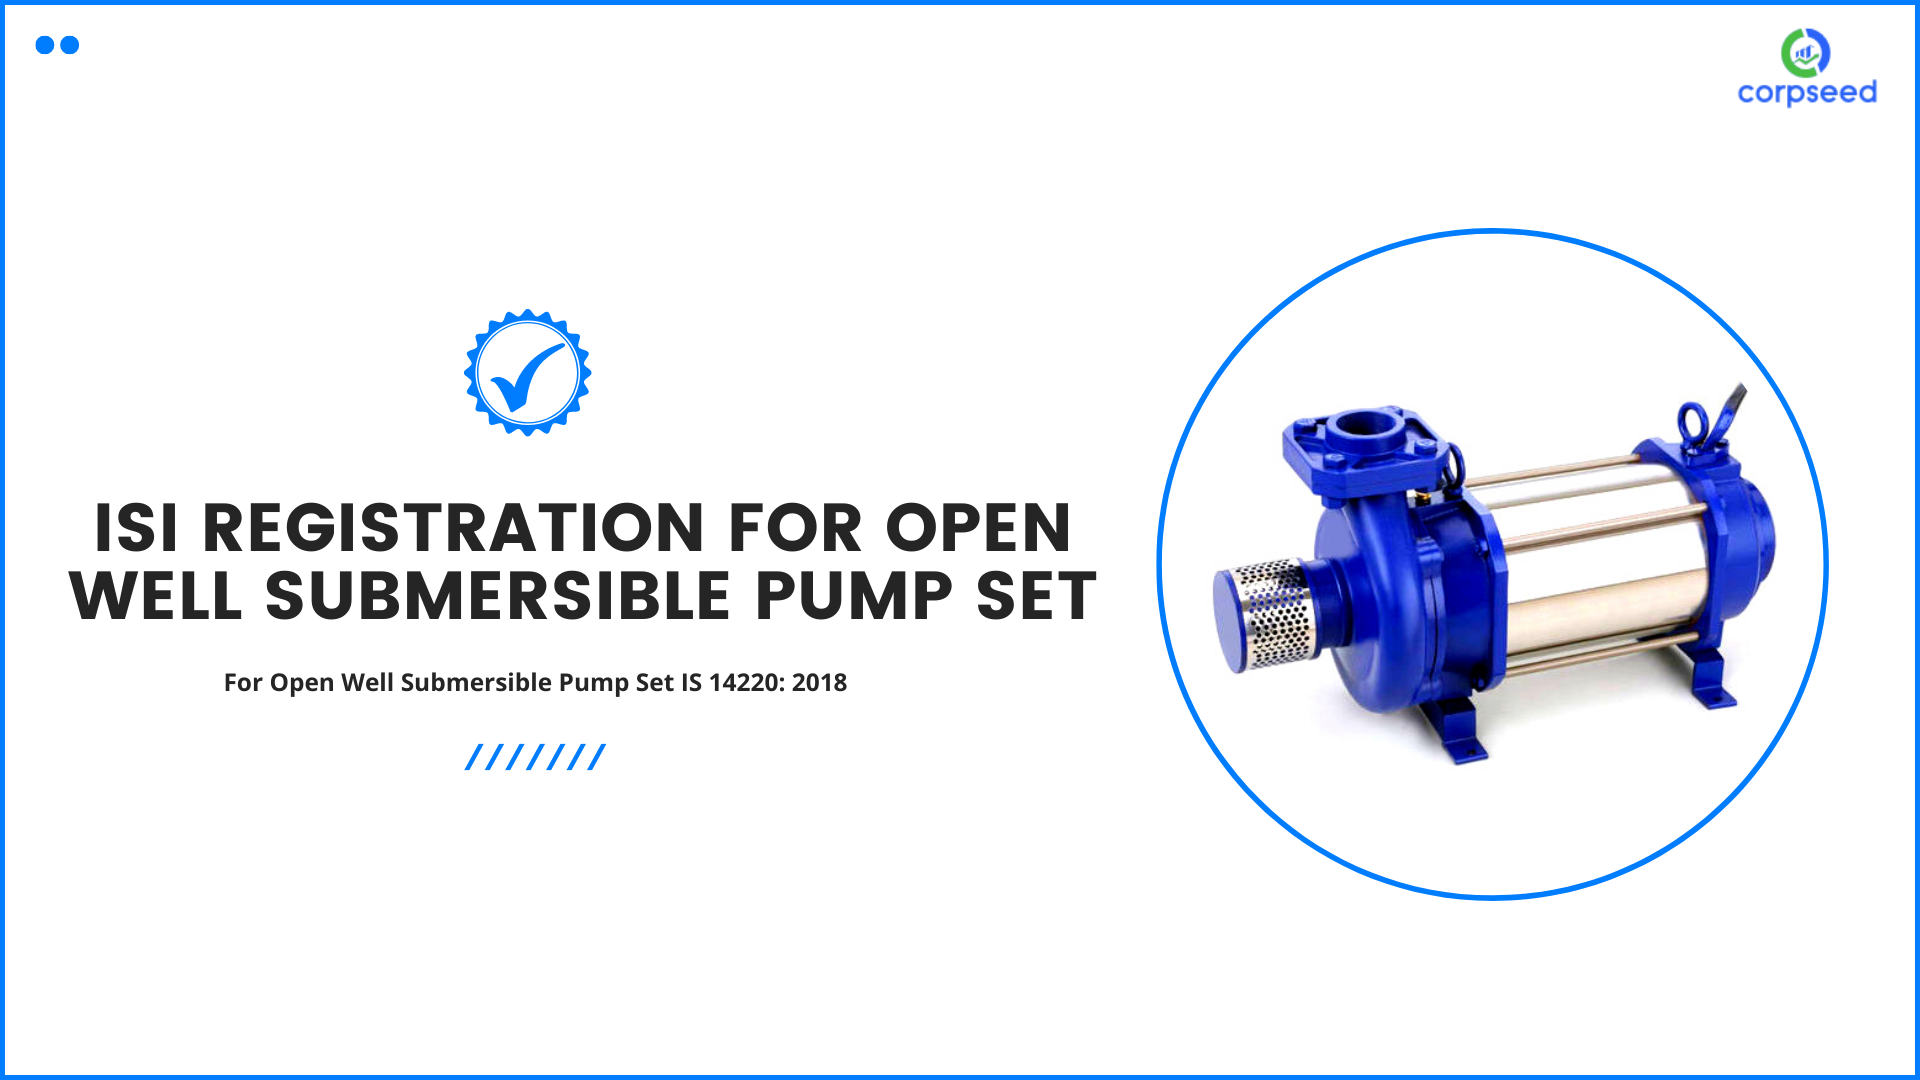 isi-registration-for-open-well-submersible-pump-set-is-14220-2018_corpseed.png